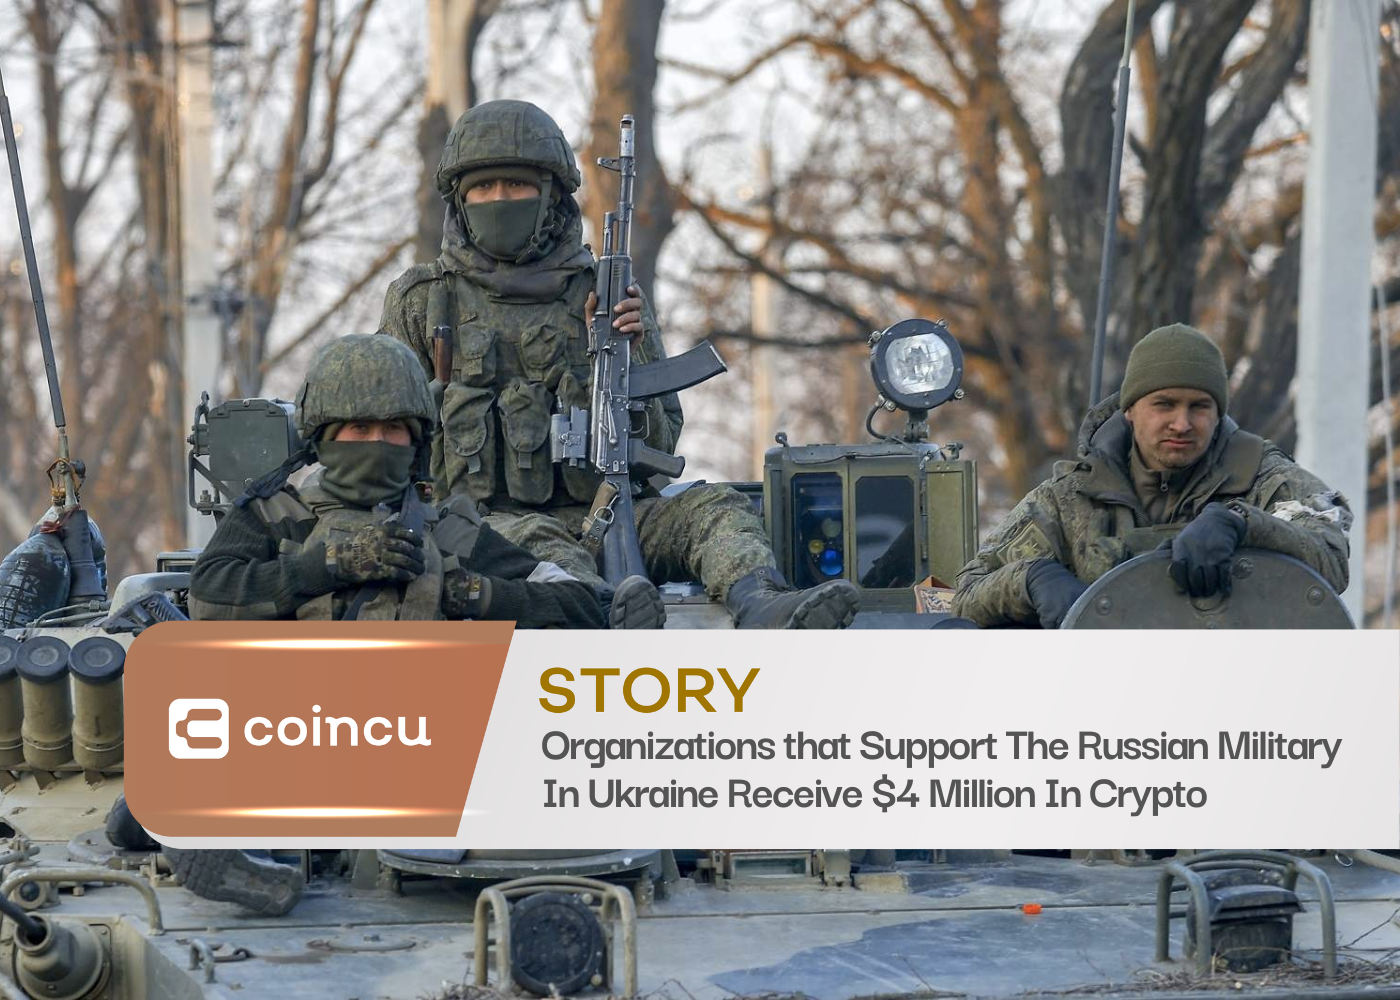 Organizations That Support The Russian Military In Ukraine Receive $4 Million In Crypto